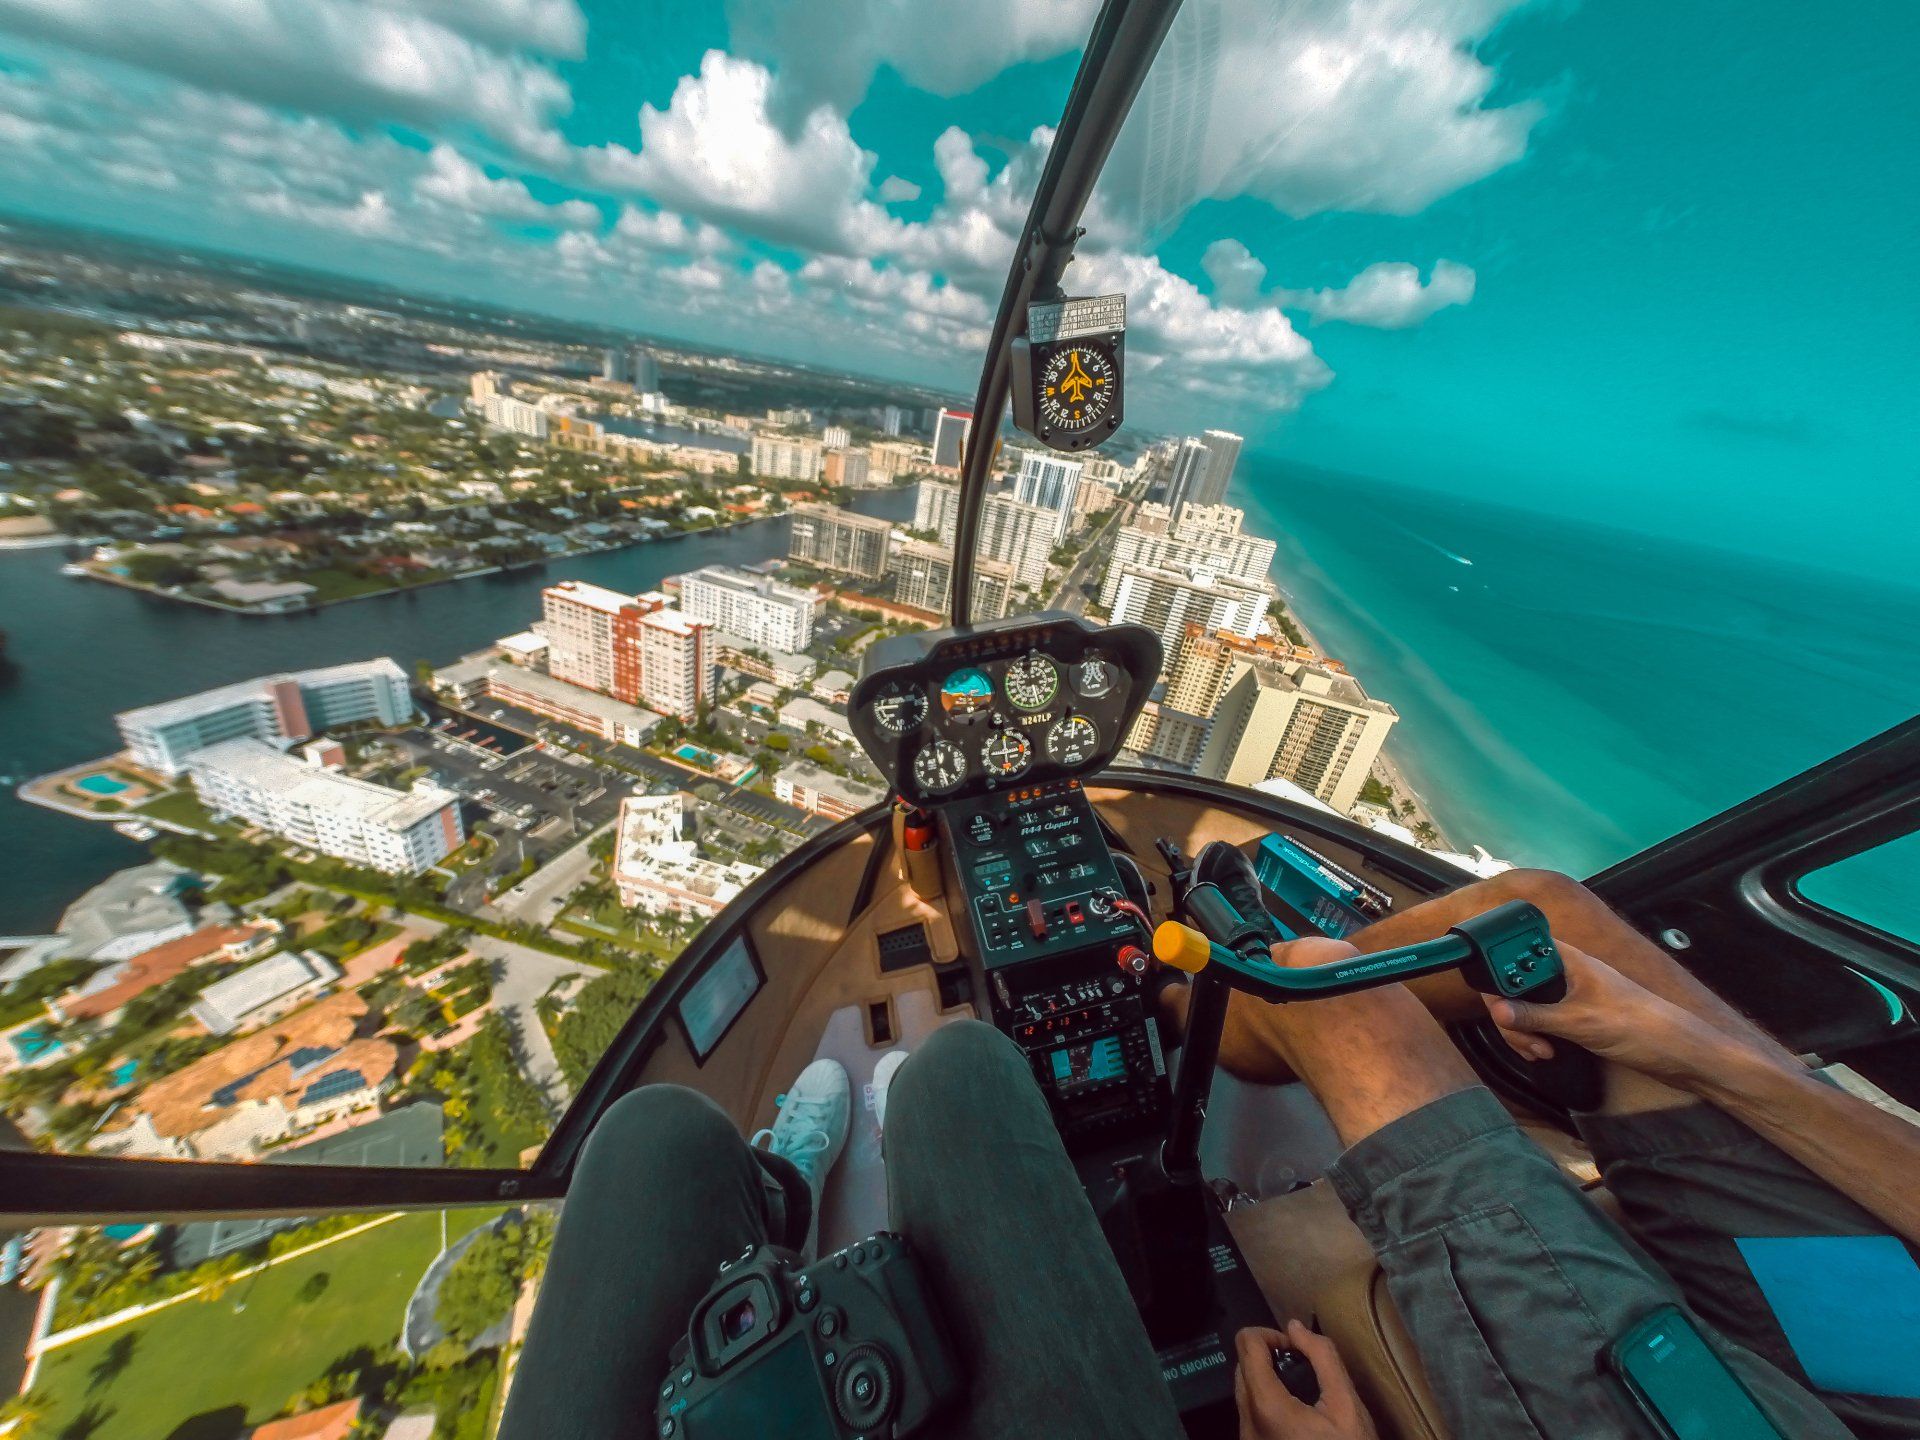 A person is sitting in the cockpit of a helicopter over a city.